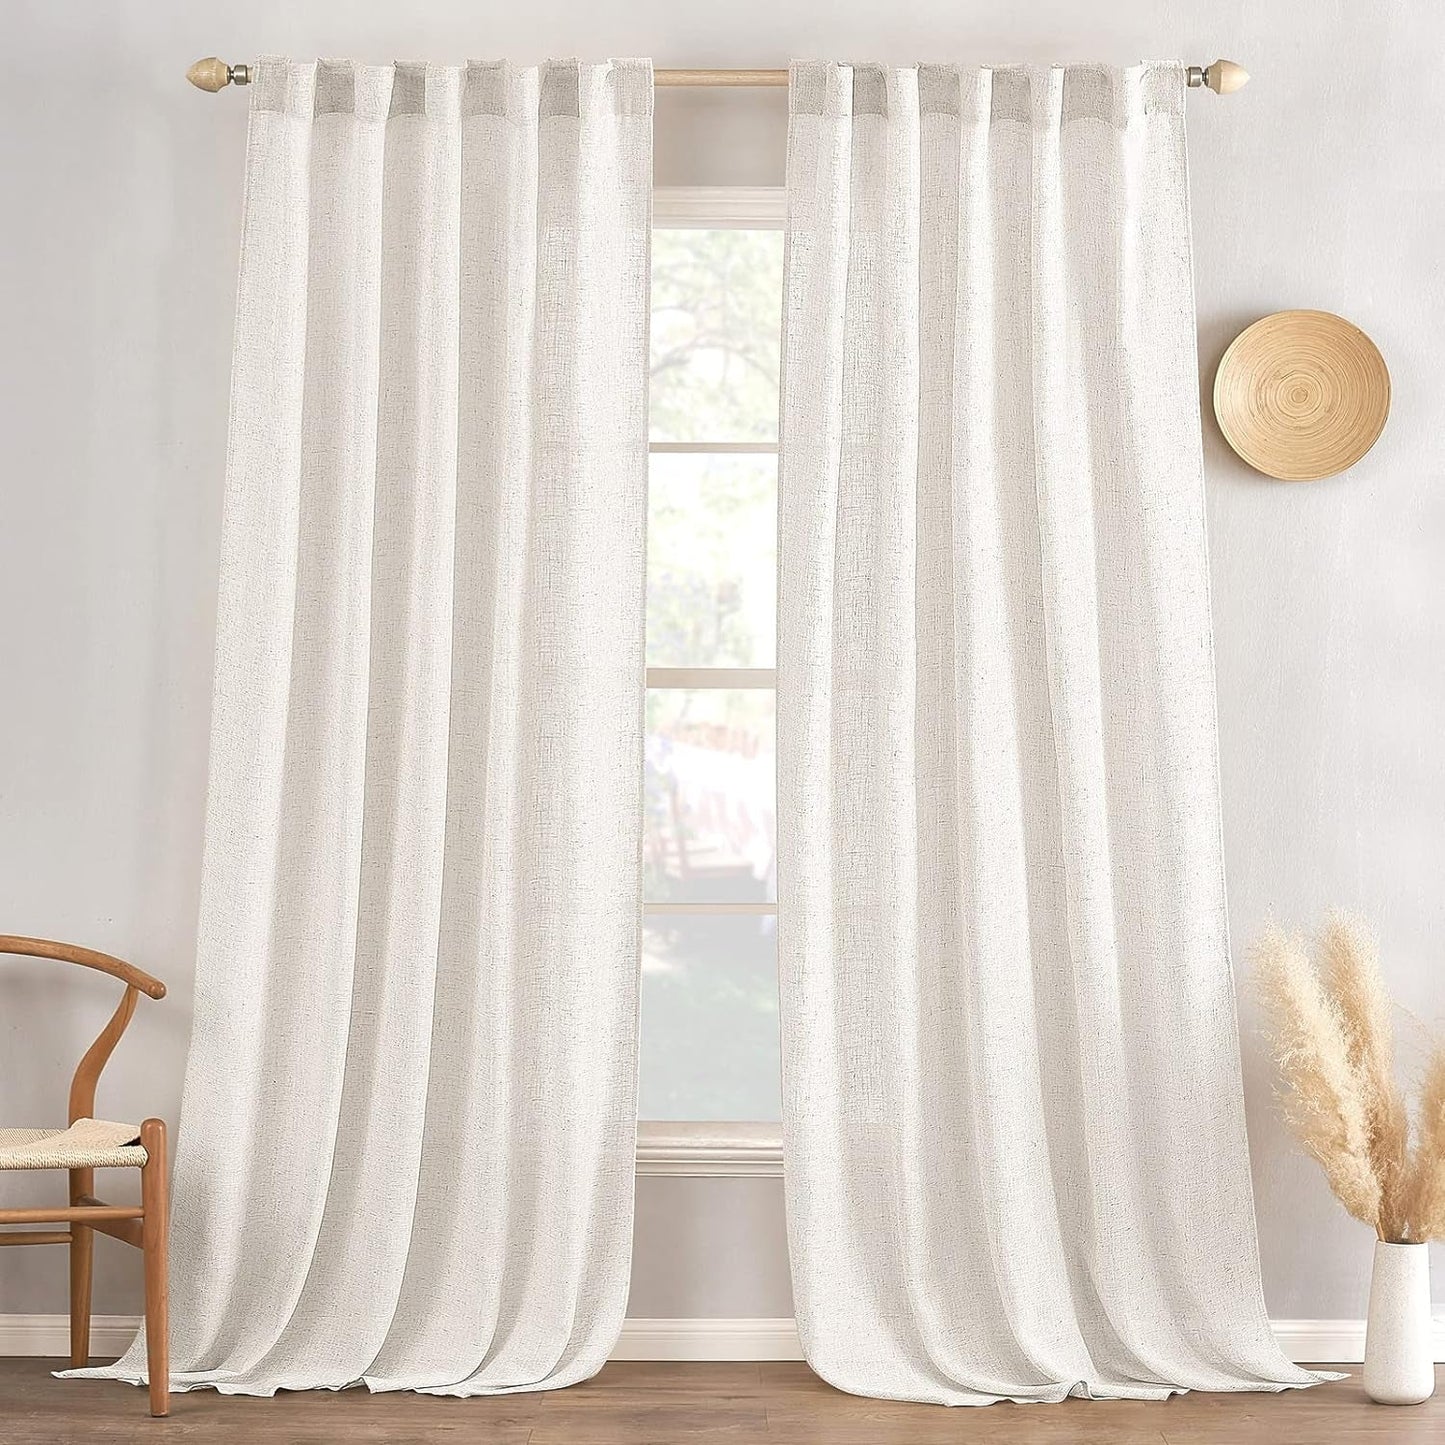 Natural Linen Cream White Curtains 84 Inches Long Rod Pocket/Back Tab Semi Sheer Drapes for Living Room Linen Textured Window Draperies Light Filtering Rustic Boho Decor 2 Panels,52X84 Inch